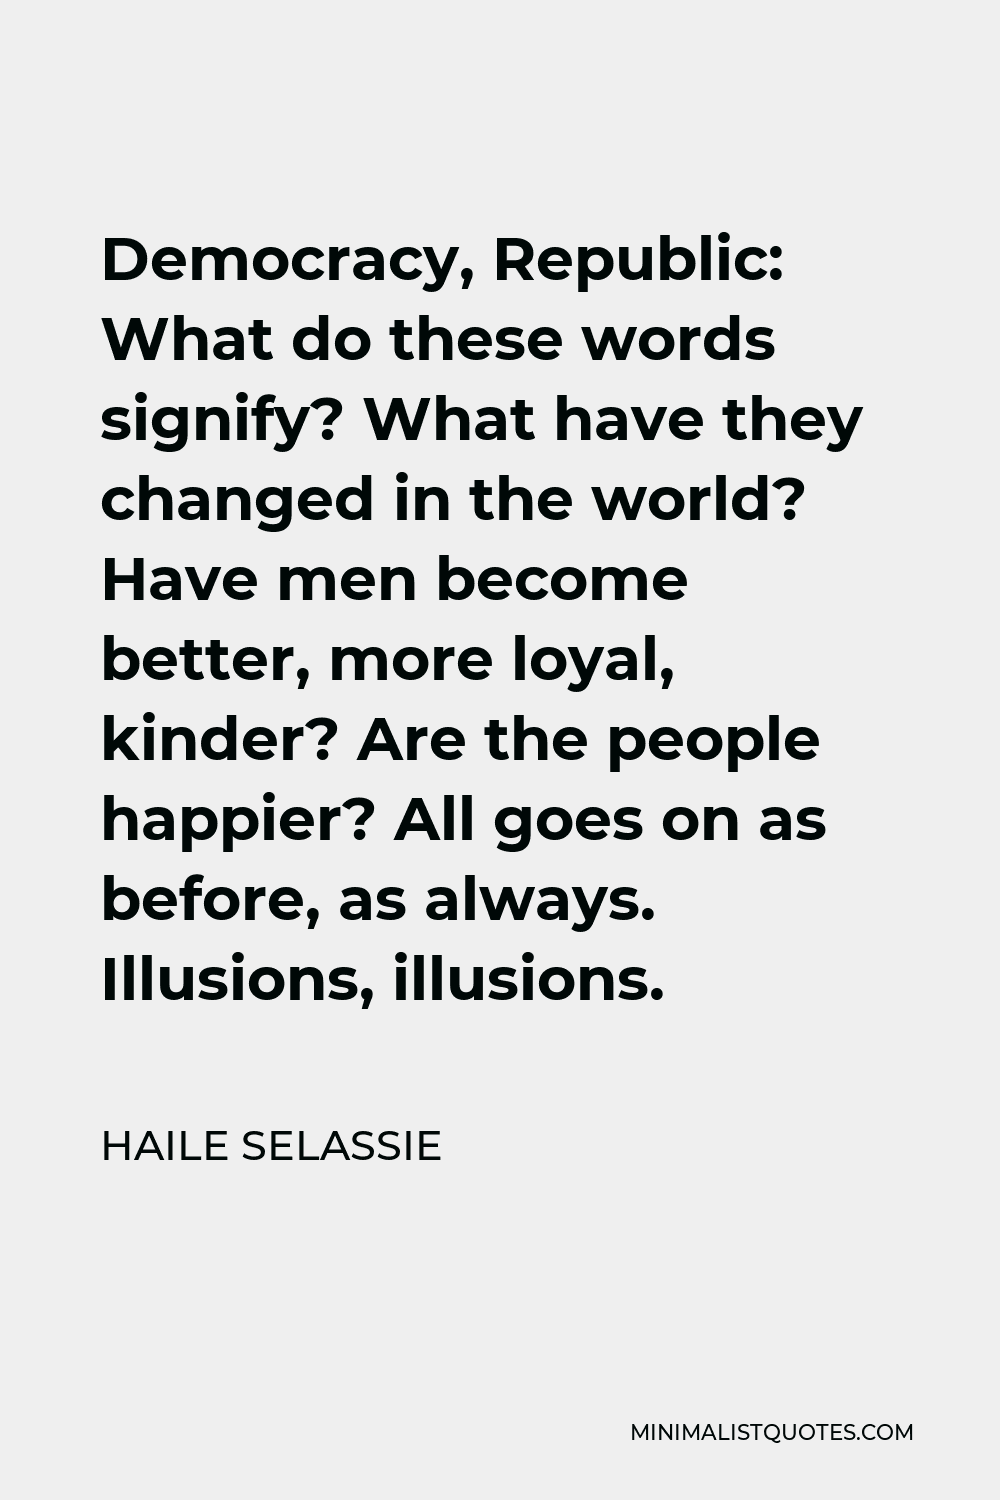 Haile Selassie Quote - Democracy, Republic: What do these words signify? What have they changed in the world? Have men become better, more loyal, kinder? Are the people happier? All goes on as before, as always. Illusions, illusions.